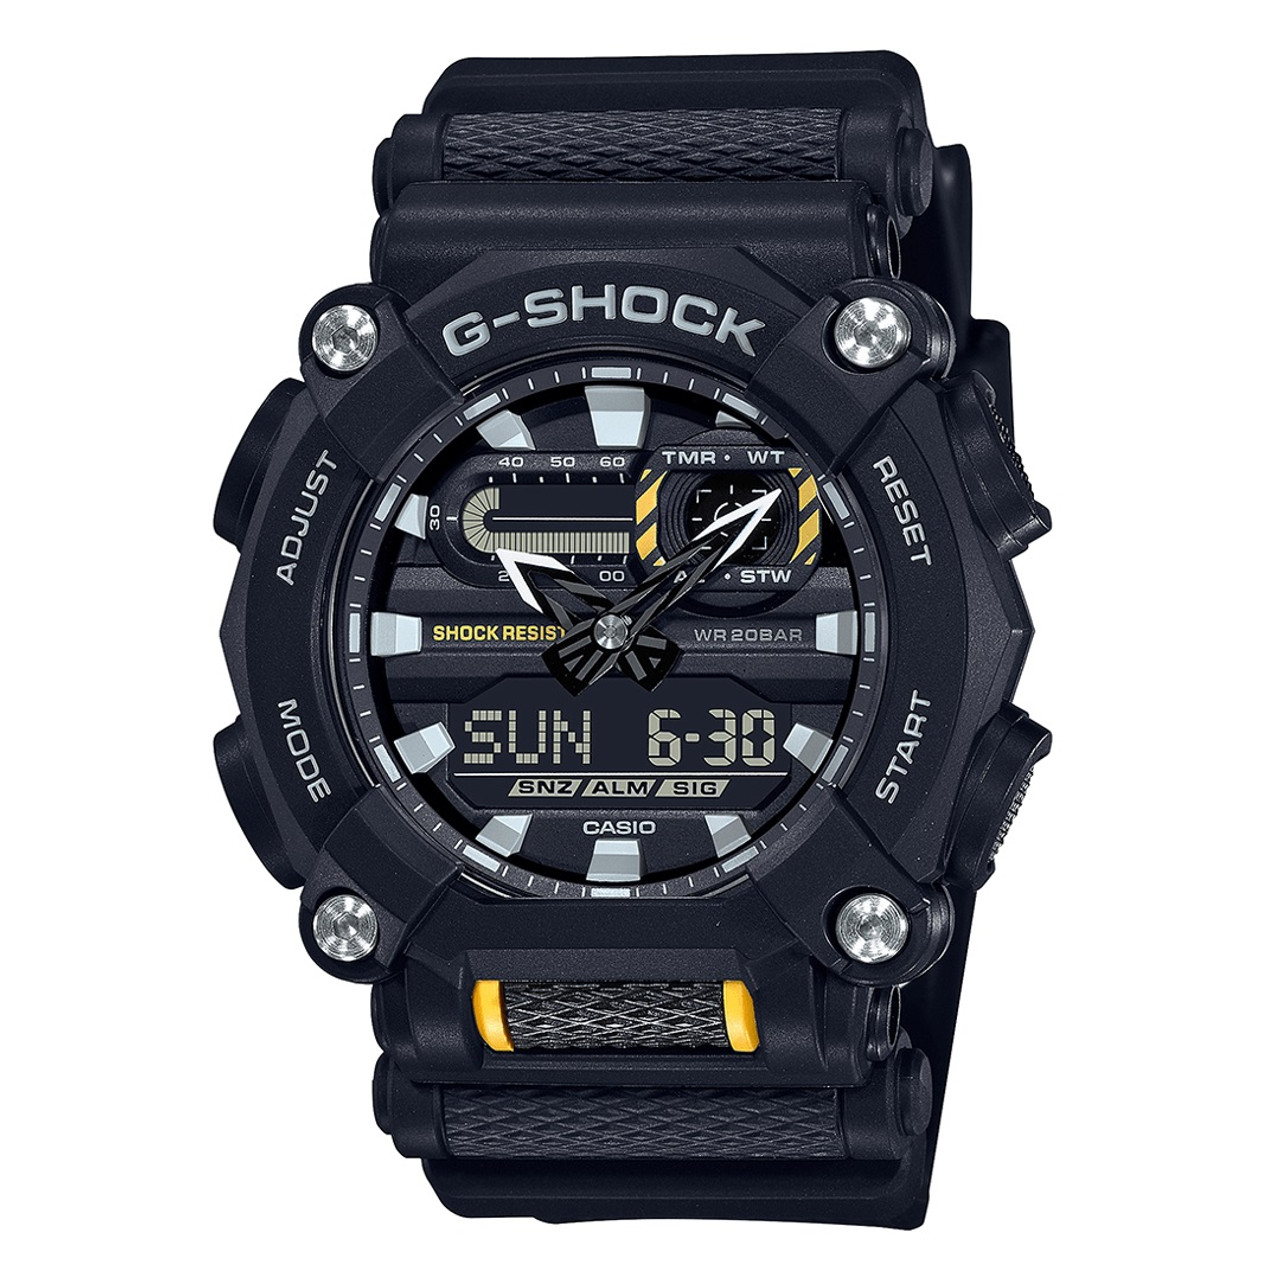 Casio G Shock Heavy Duty Gents Watch GA-900-1AER RRP £119.00 Our Price  £82.95